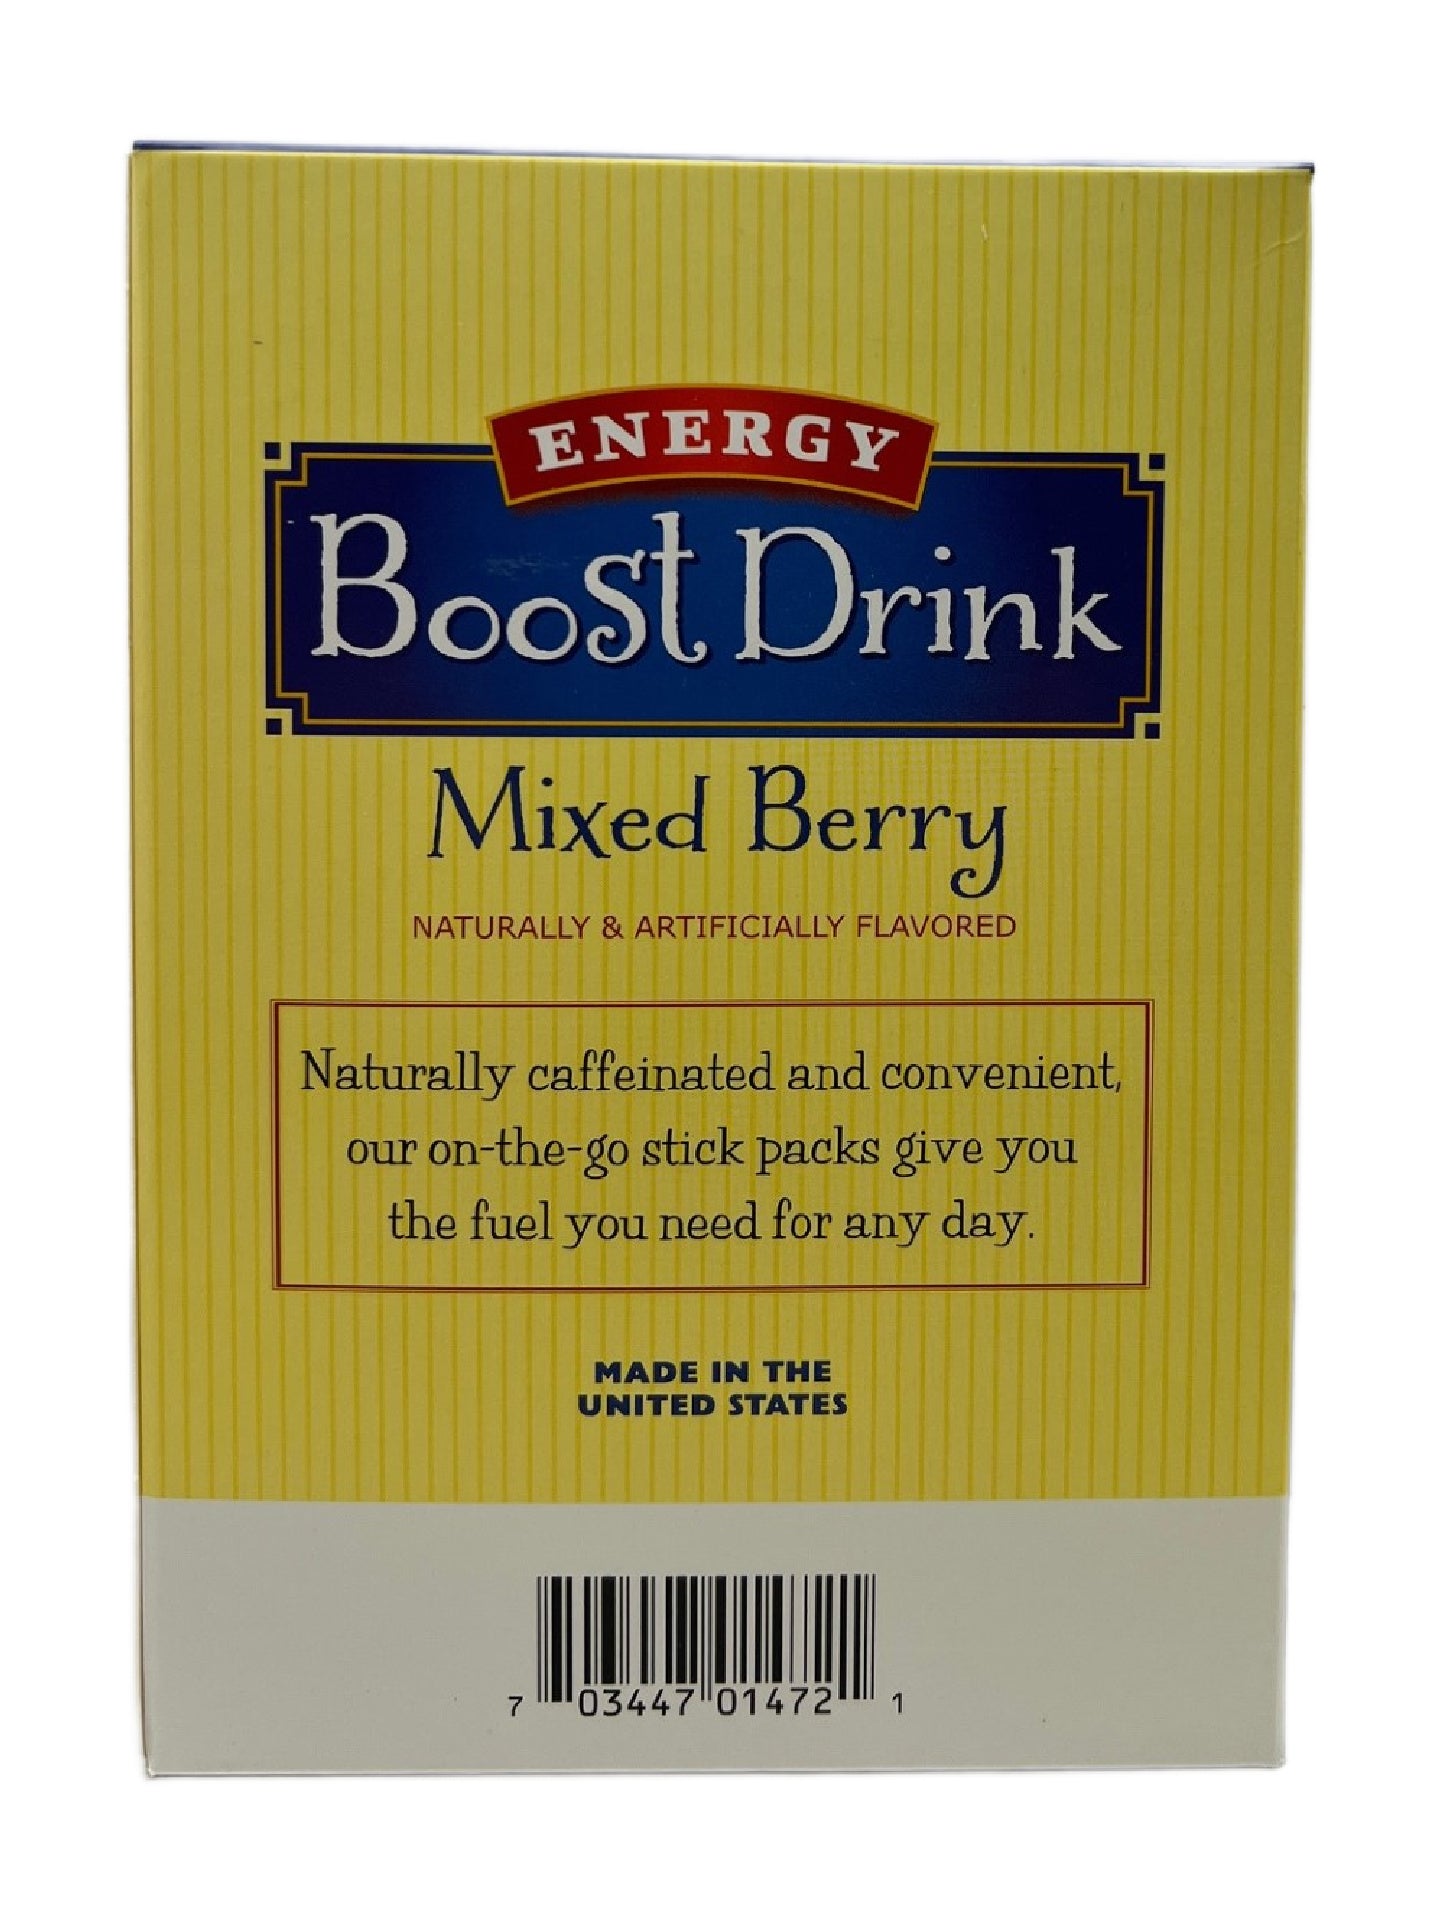 NutriWise Energy Boost Drink | Mixed Berry (21/box)